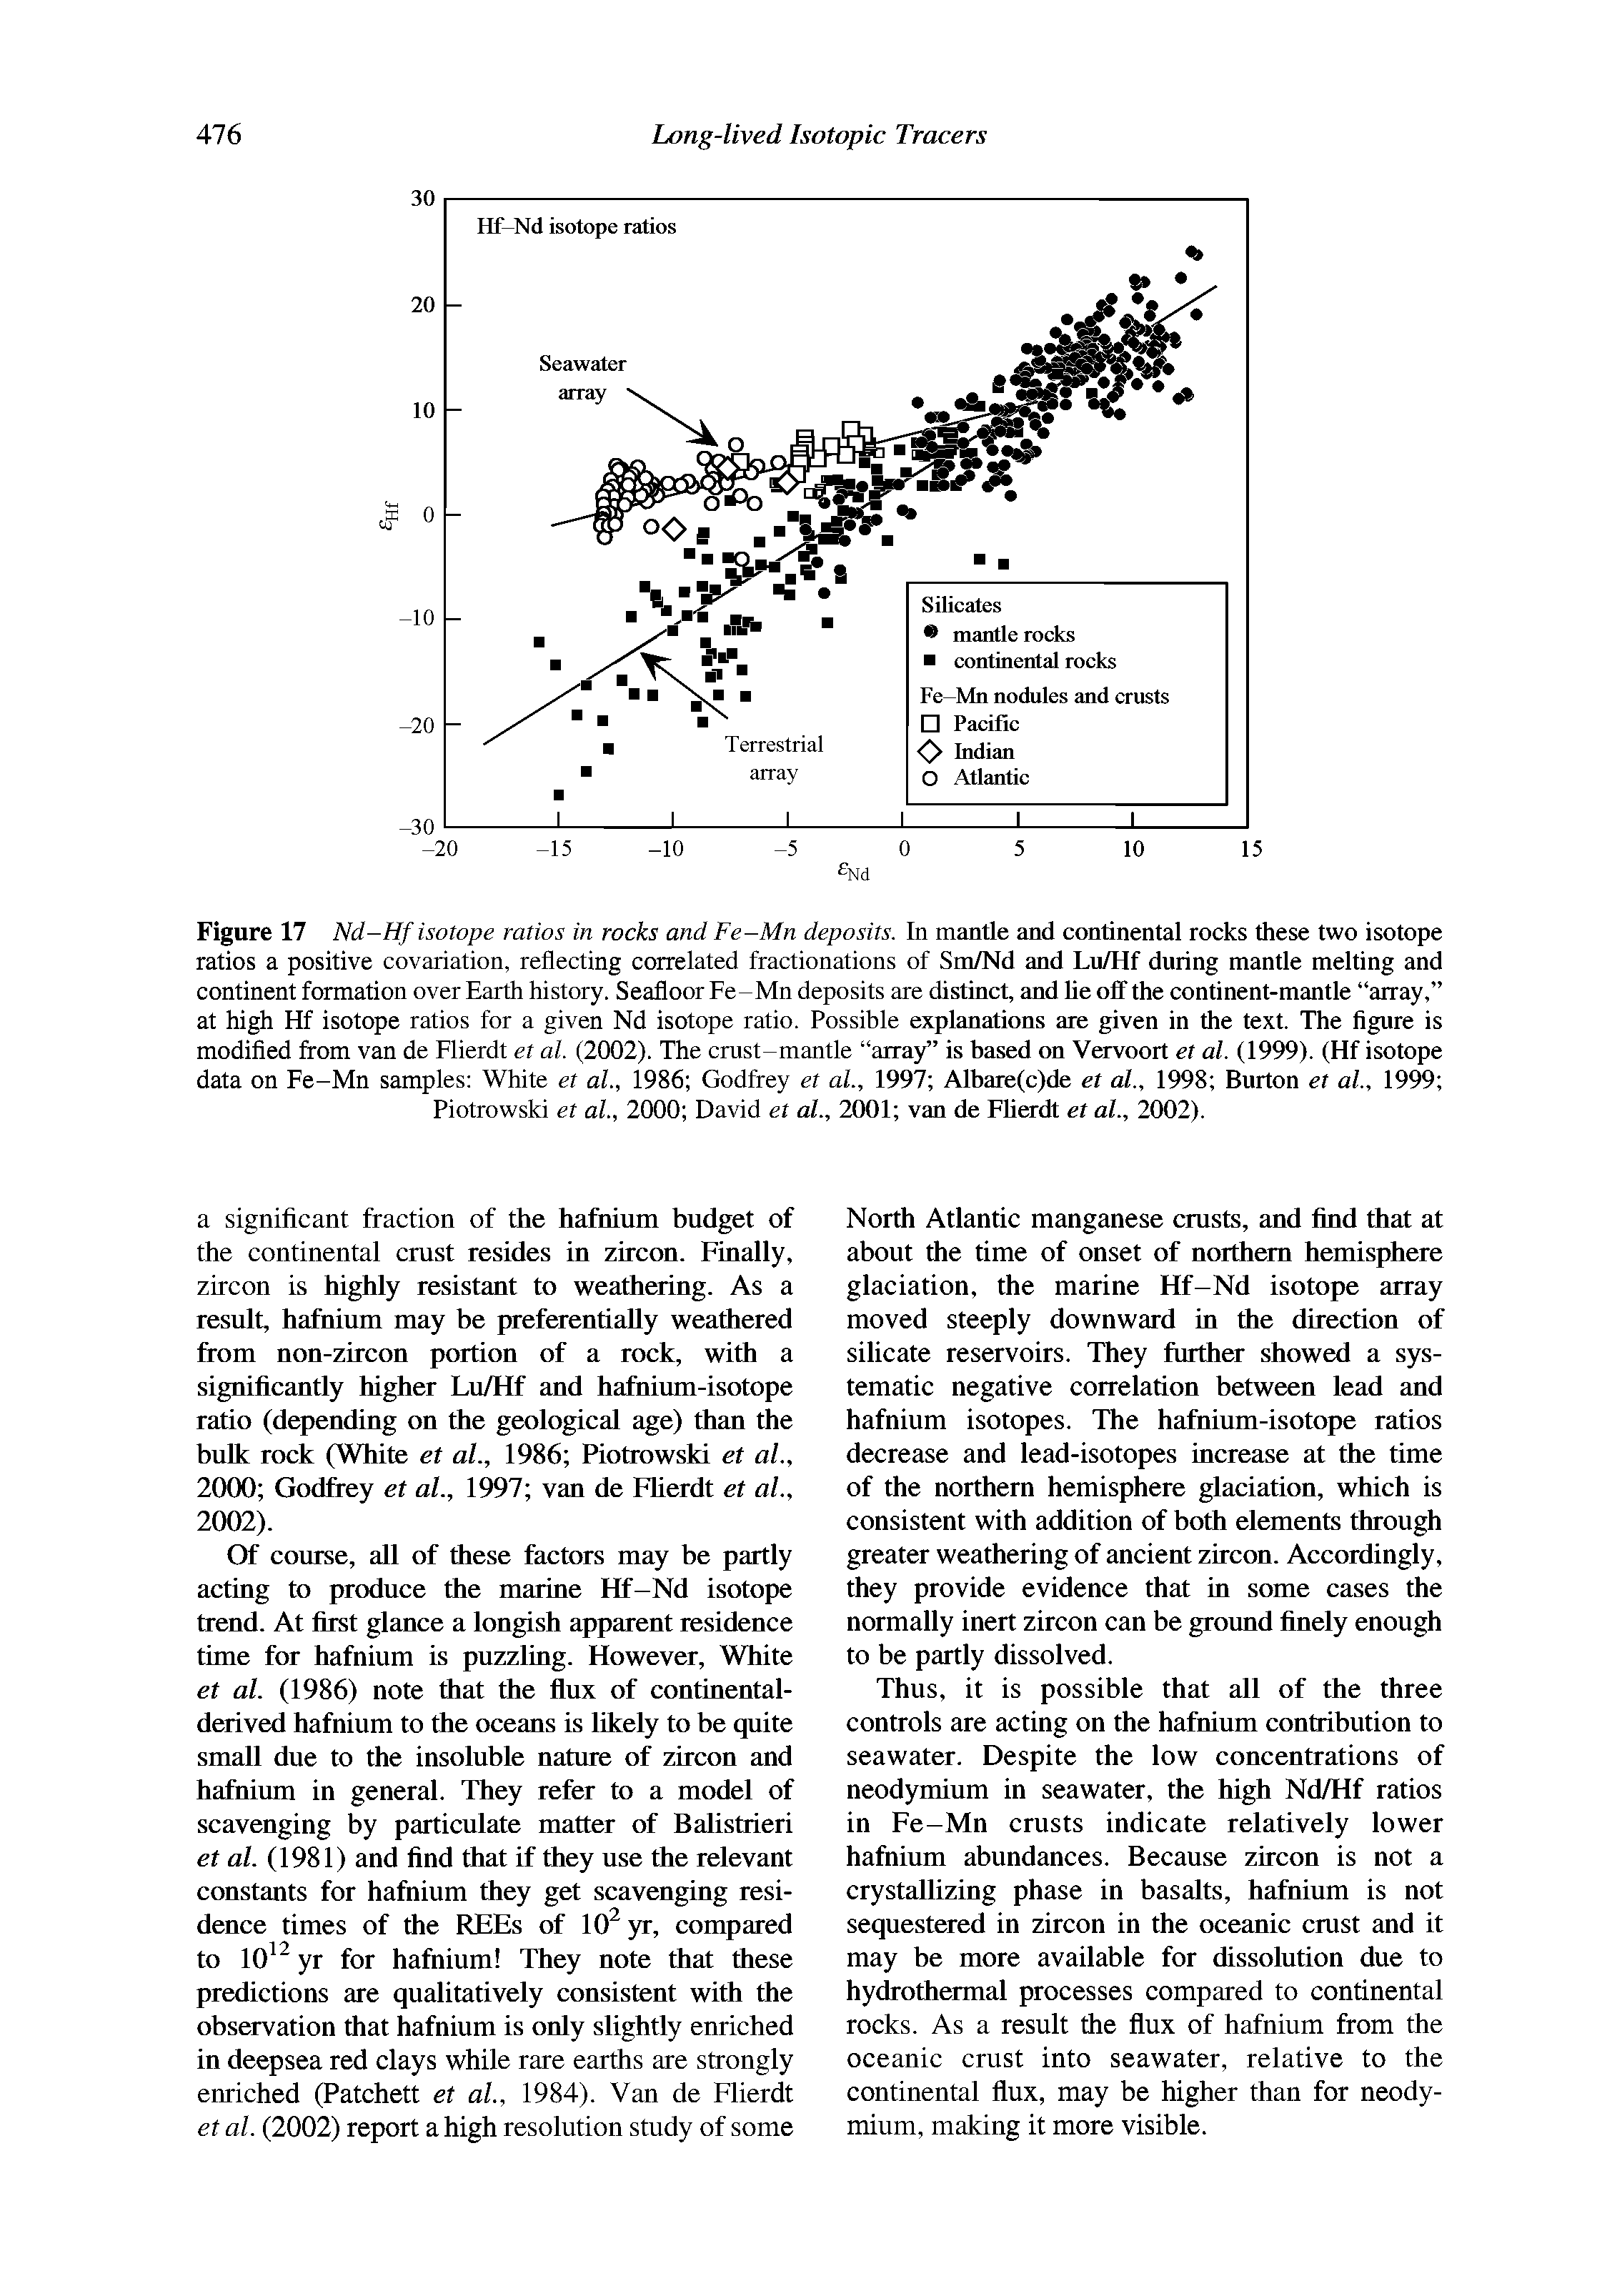 Figure 17 Nd-Hf isotope ratios in rocks and Fe-Mn deposits. In mantle and continental rocks these two isotope ratios a positive covariation, reflecting correlated fractionations of Sm/Nd and Ln/Hf during mantle melting and continent formation over Earth history. Seafloor Fe-Mn deposits are distinct, and lie off the continent-mantle array, at high Hf isotope ratios for a given Nd isotope ratio. Possible explanations are given in the text. The figure is modified from van de Flierdt et al. (2002). The crust-mantle array is based on Vervoort et al. (1999). (Hf isotope data on Fe-Mn samples White et al., 1986 Godfrey et al., 1997 Alhare(c)de et al., 1998 Burton et al., 1999 ...